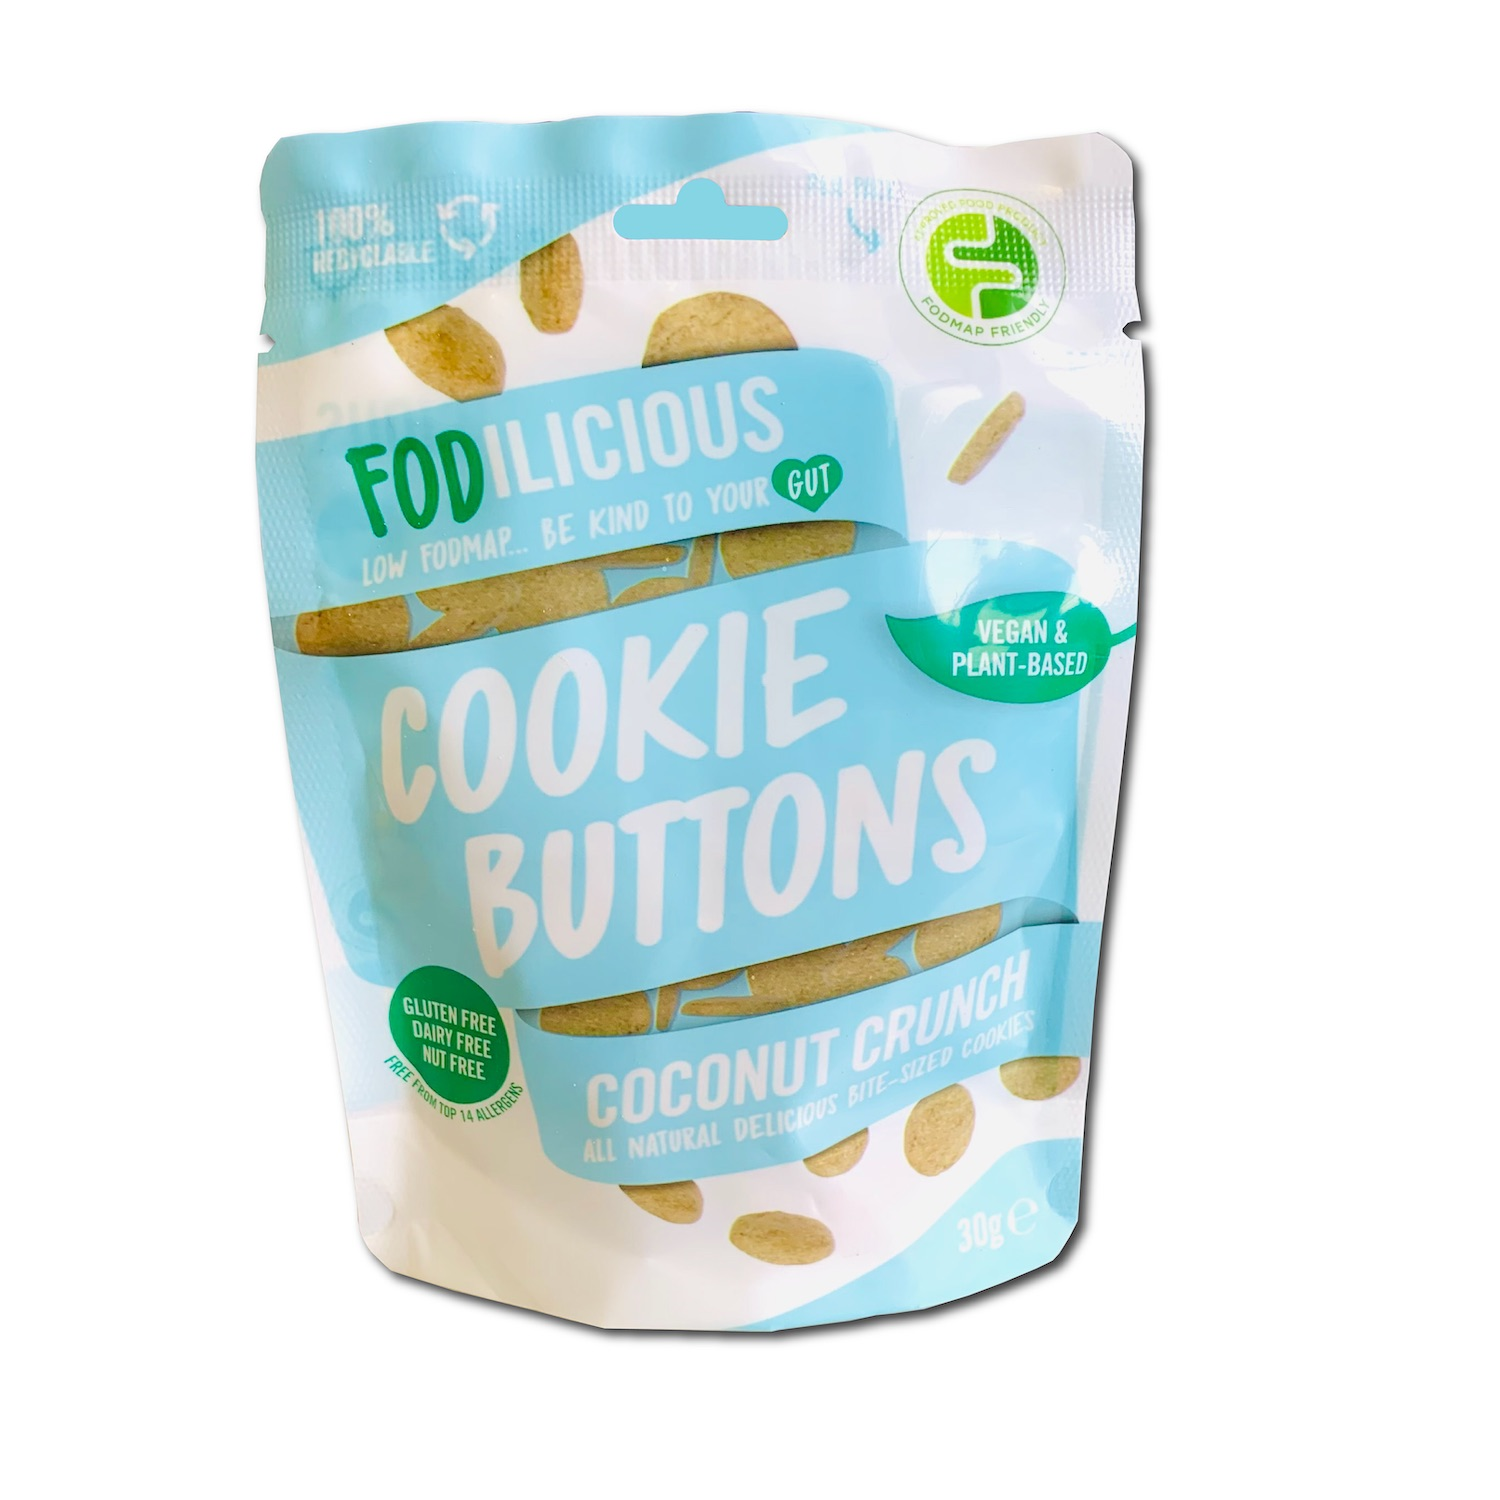 Fodilicious Cookie Buttons Coconut Crunch